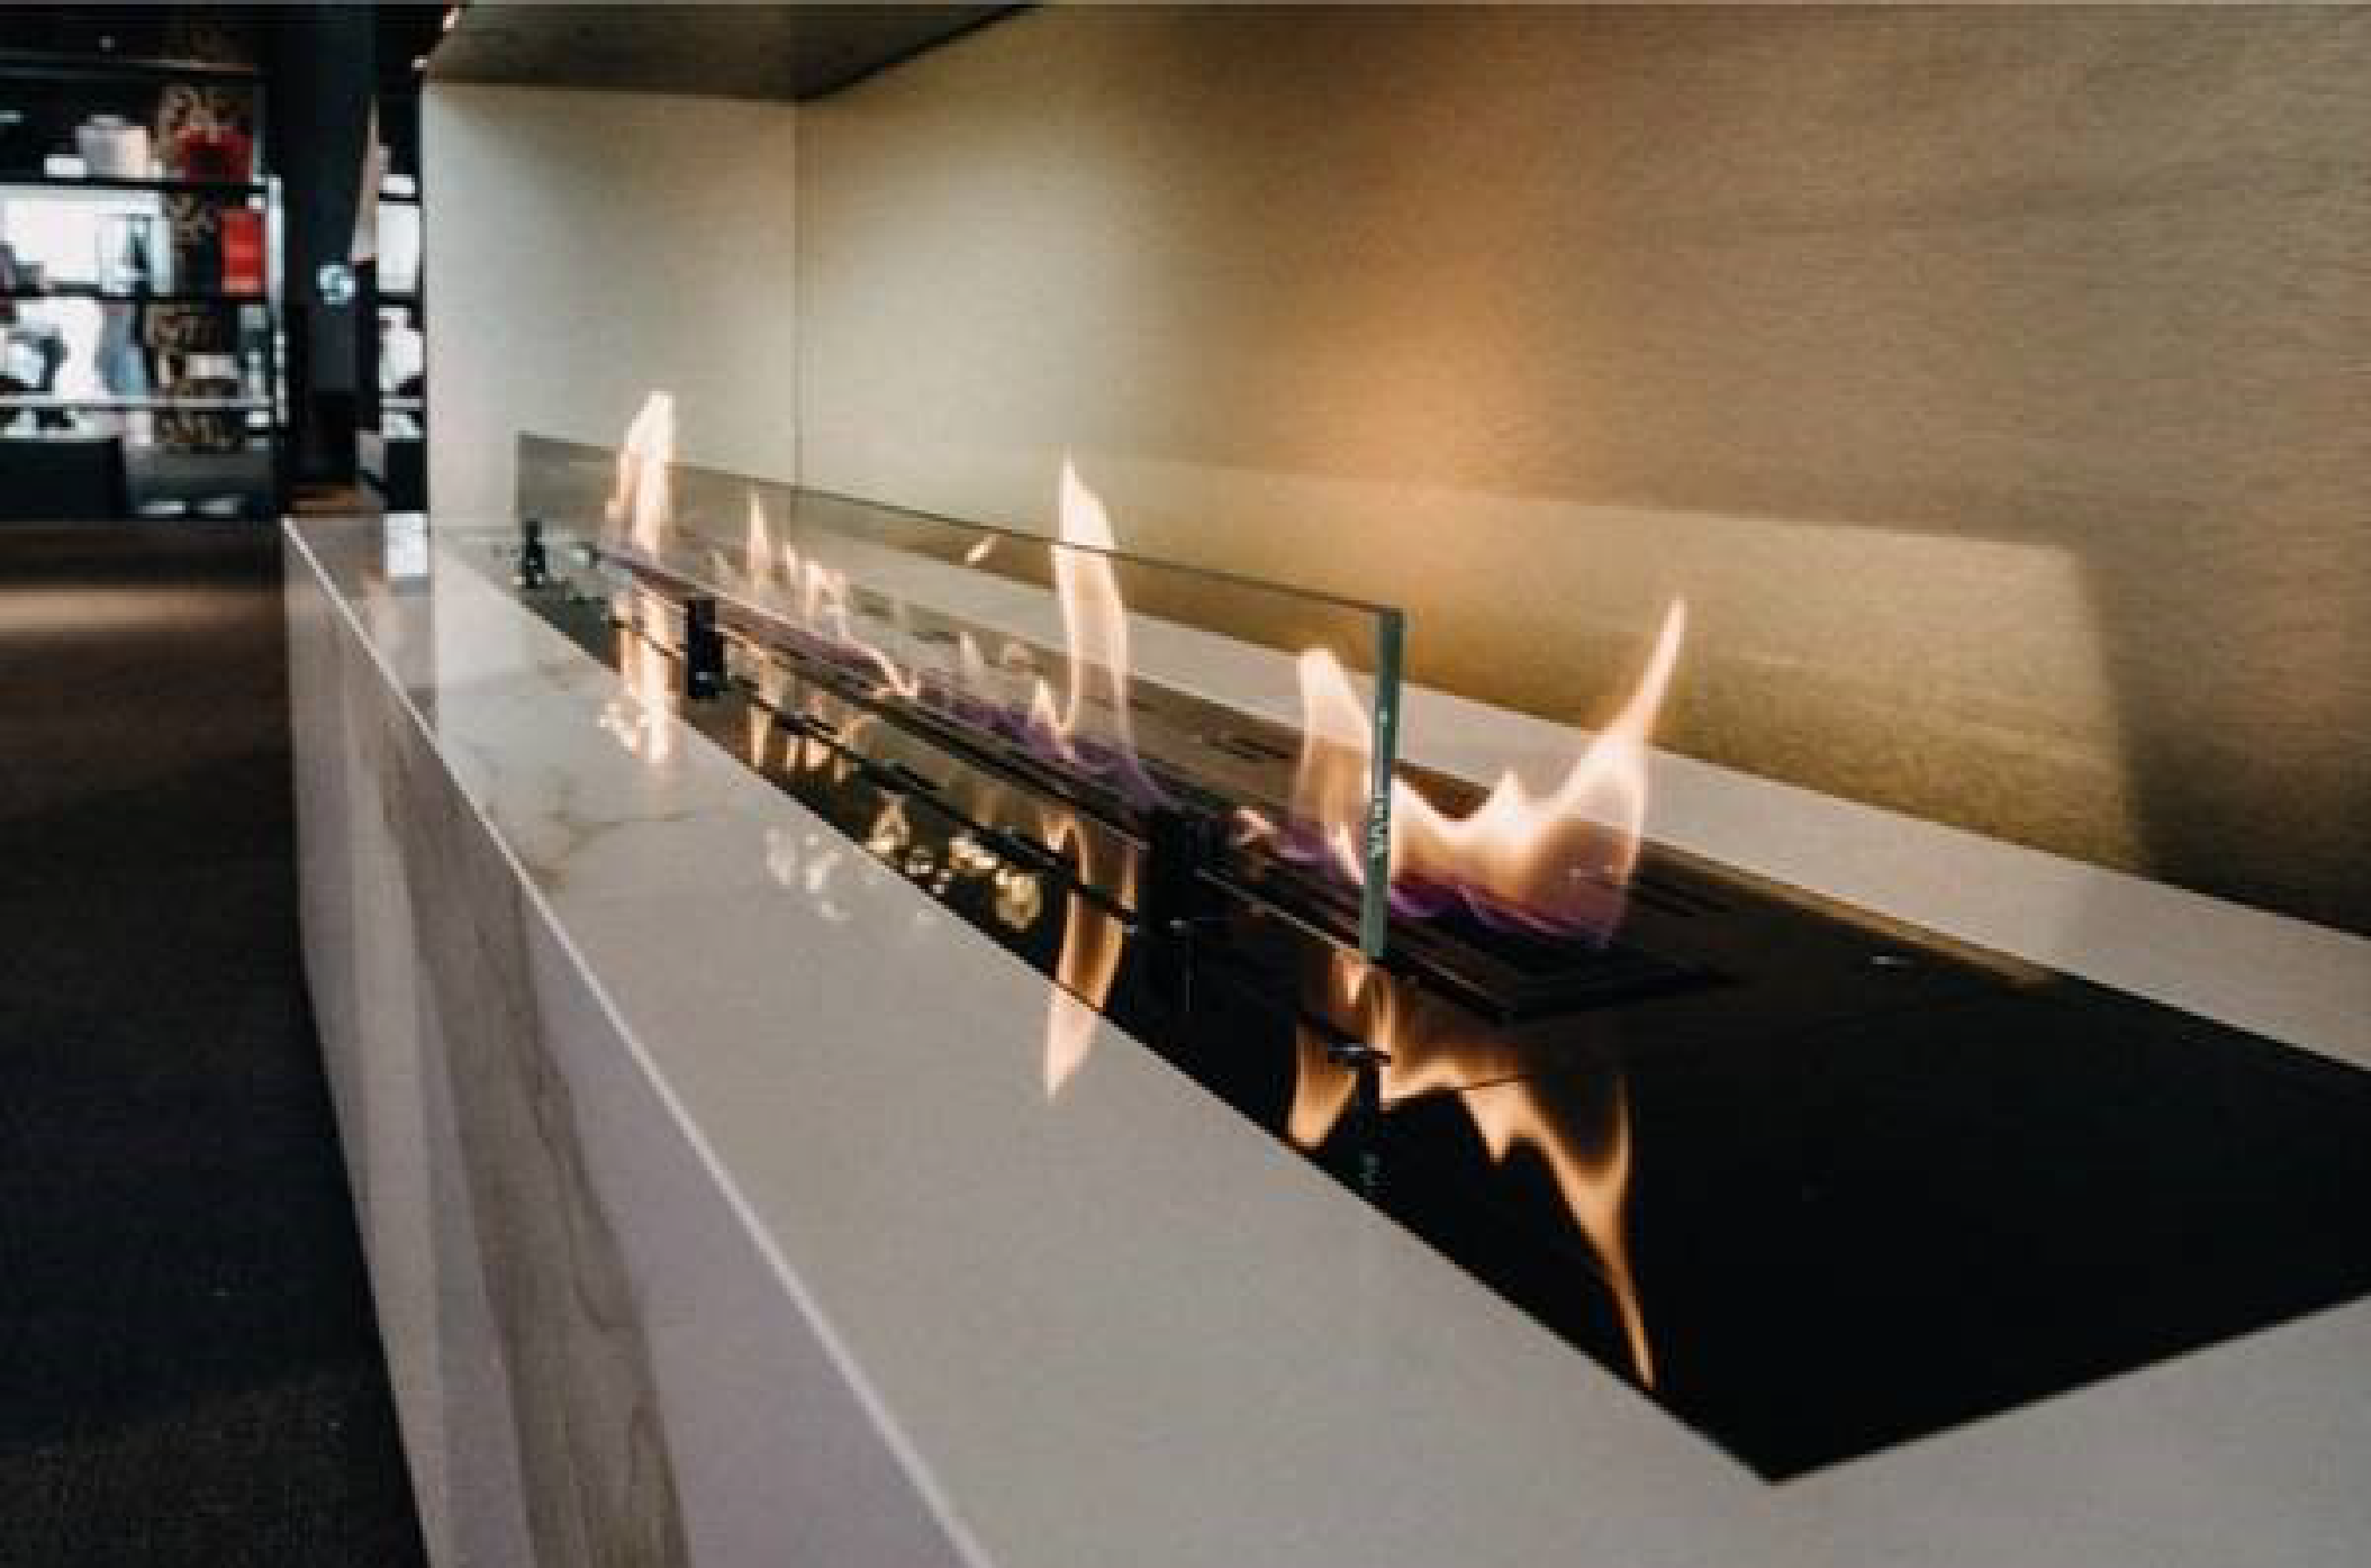 Glammfire – A new form of heating